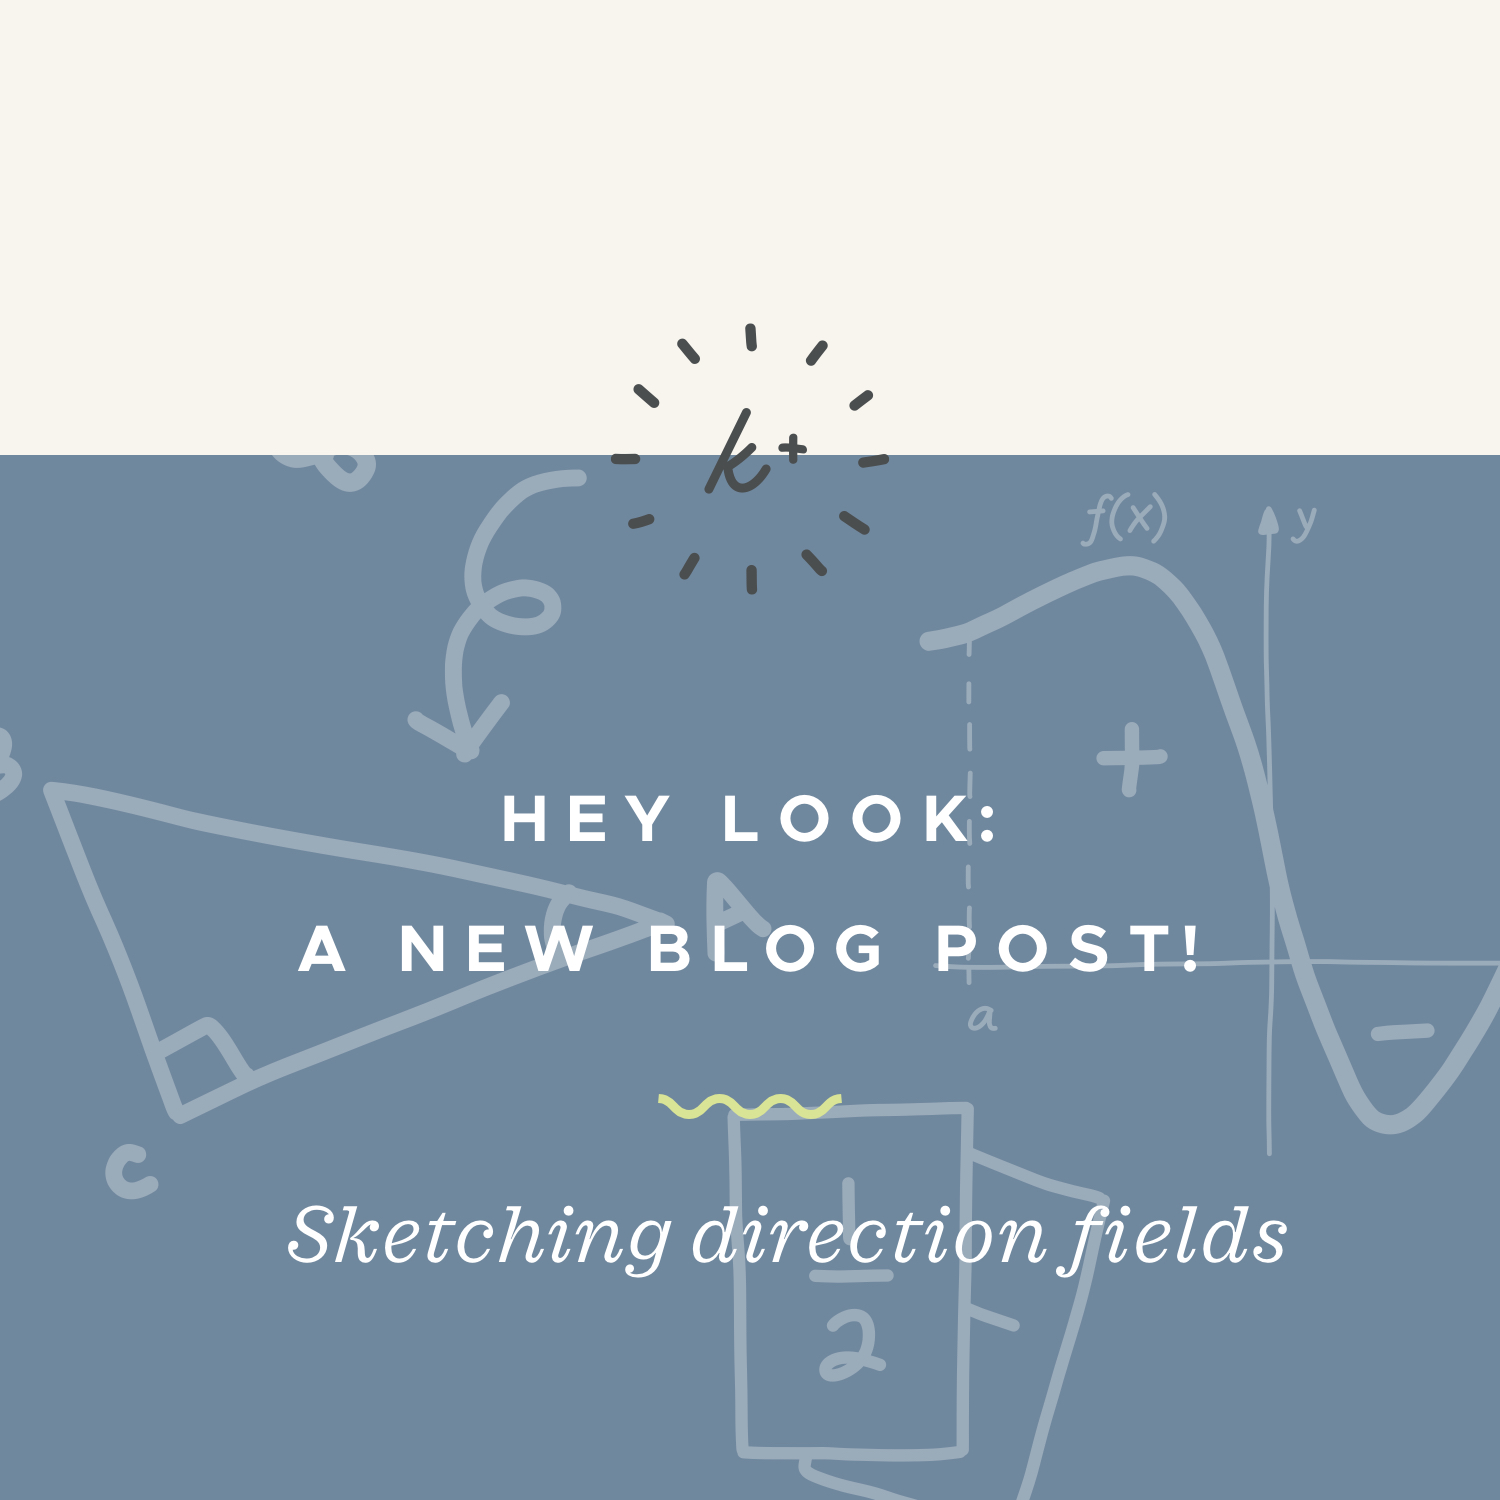 How To Sketch Direction Fields Krista King Math Online